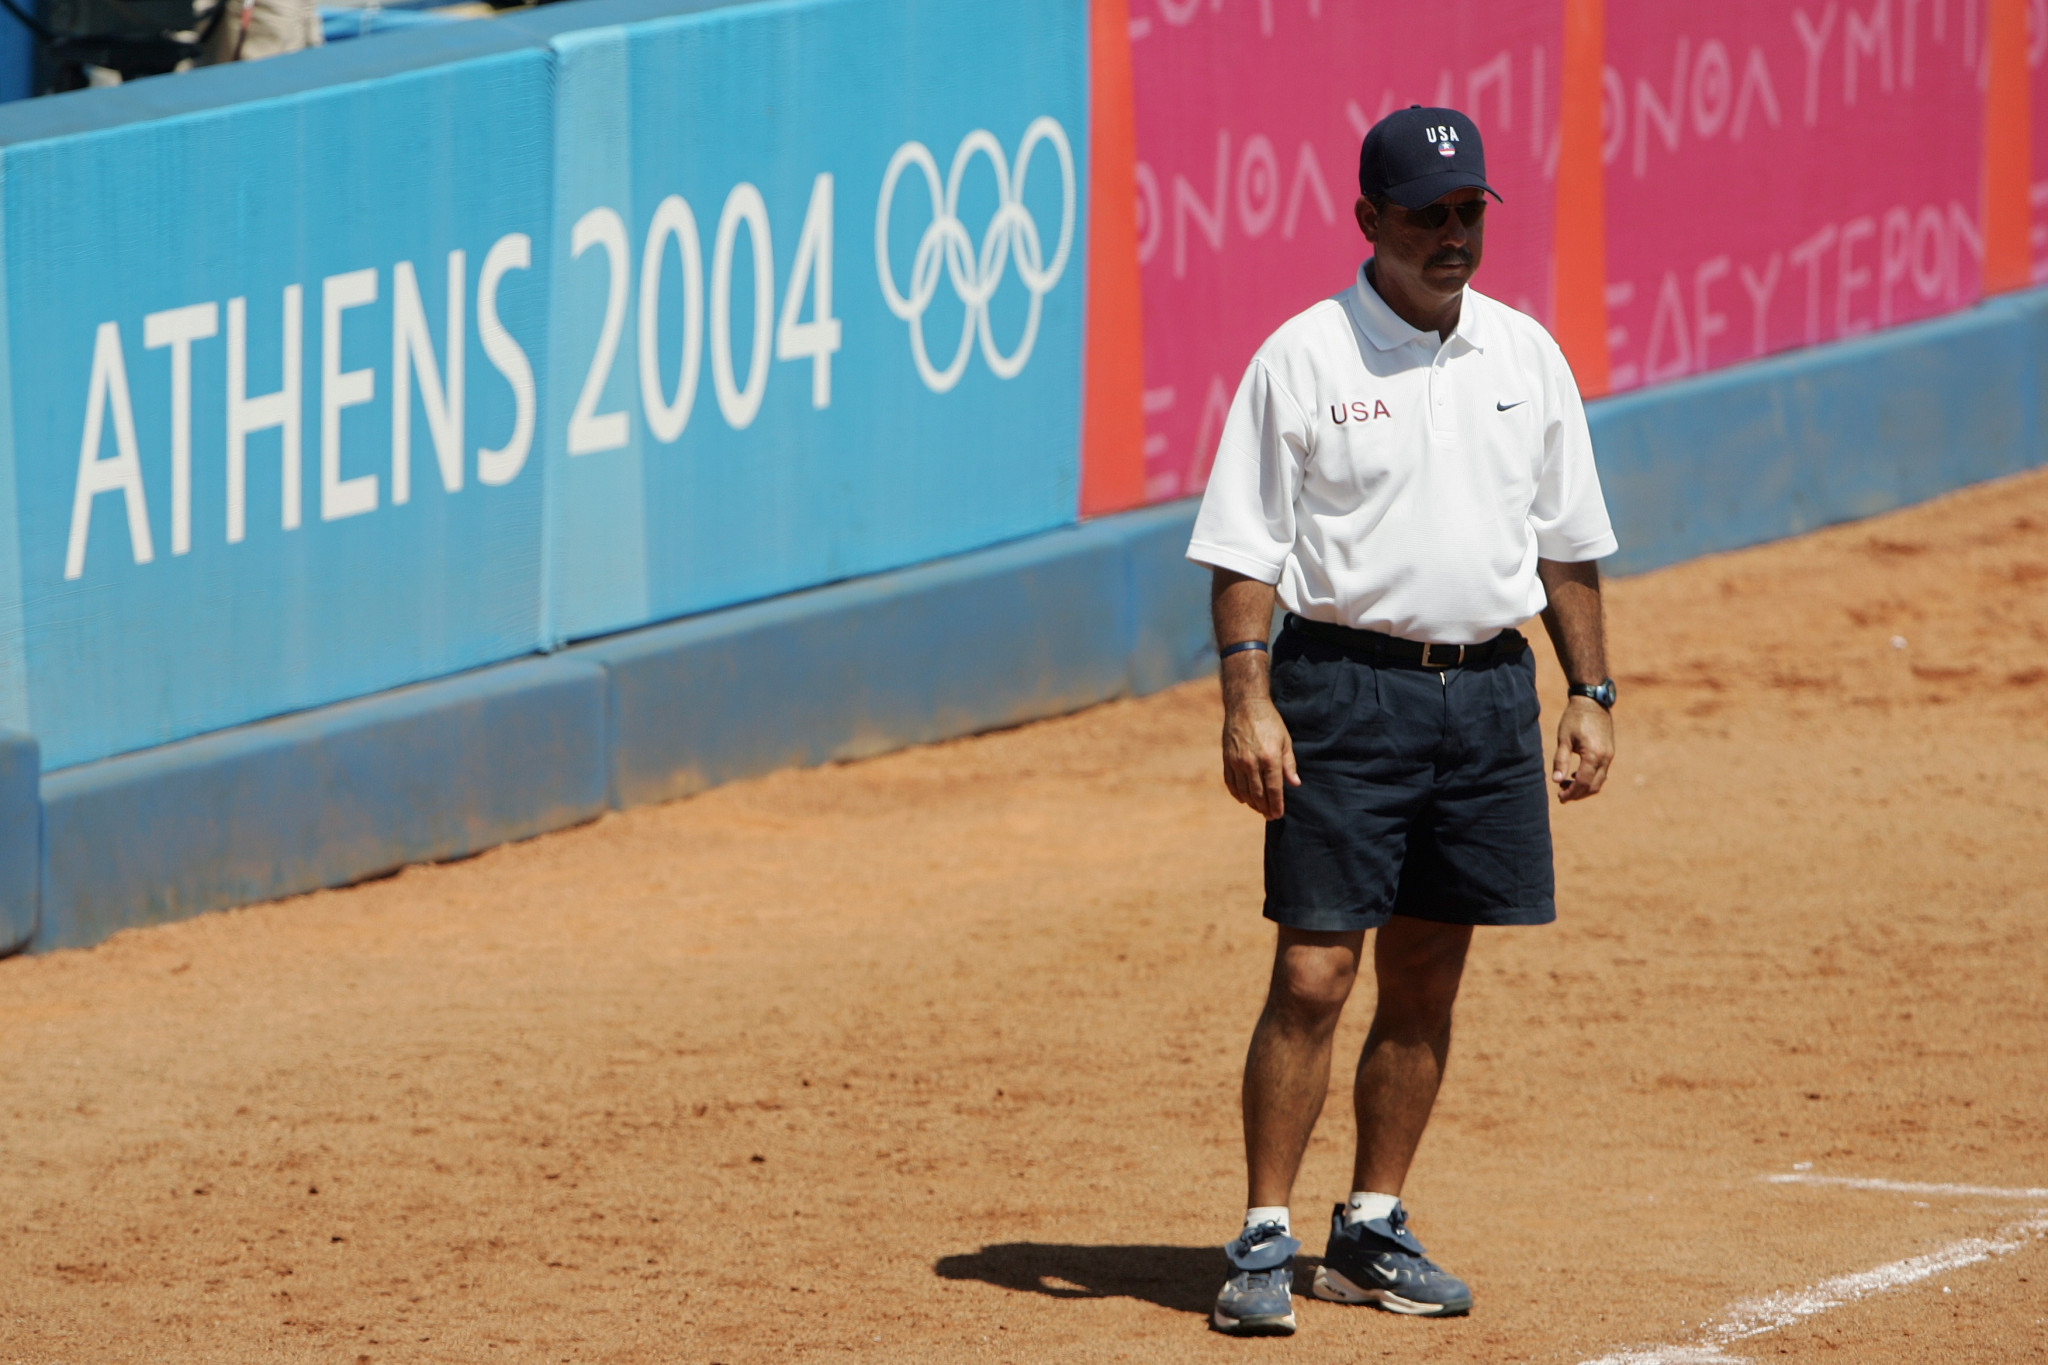 Arizona university softball field named after Olympic gold medal-winning coach Candrea 